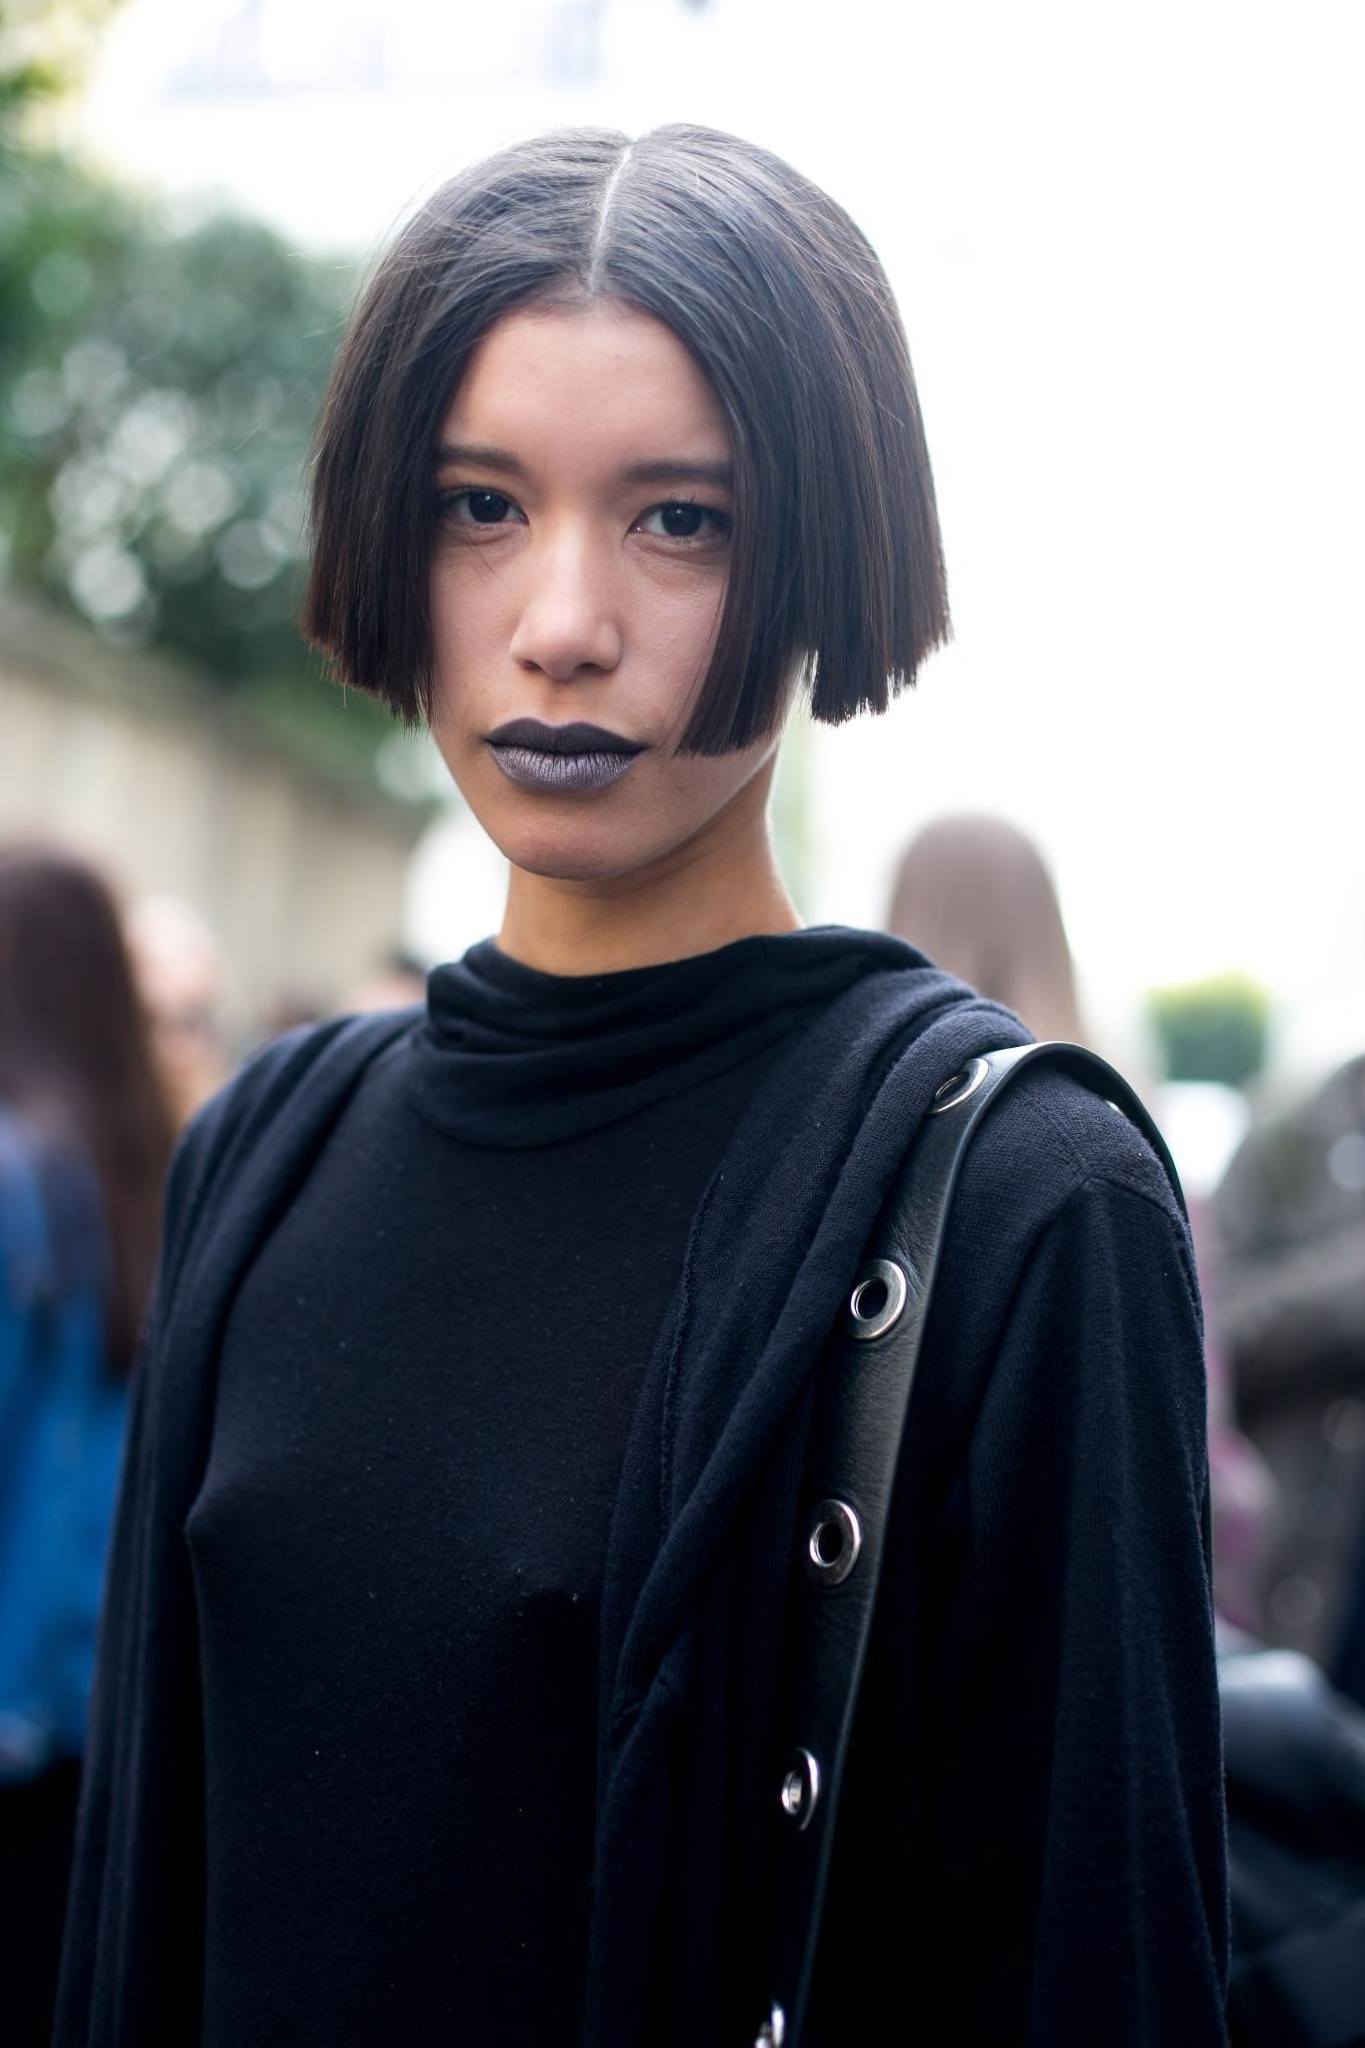 50 Spectacular Blunt Bob Haircut Ideas - The Right Hairstyles